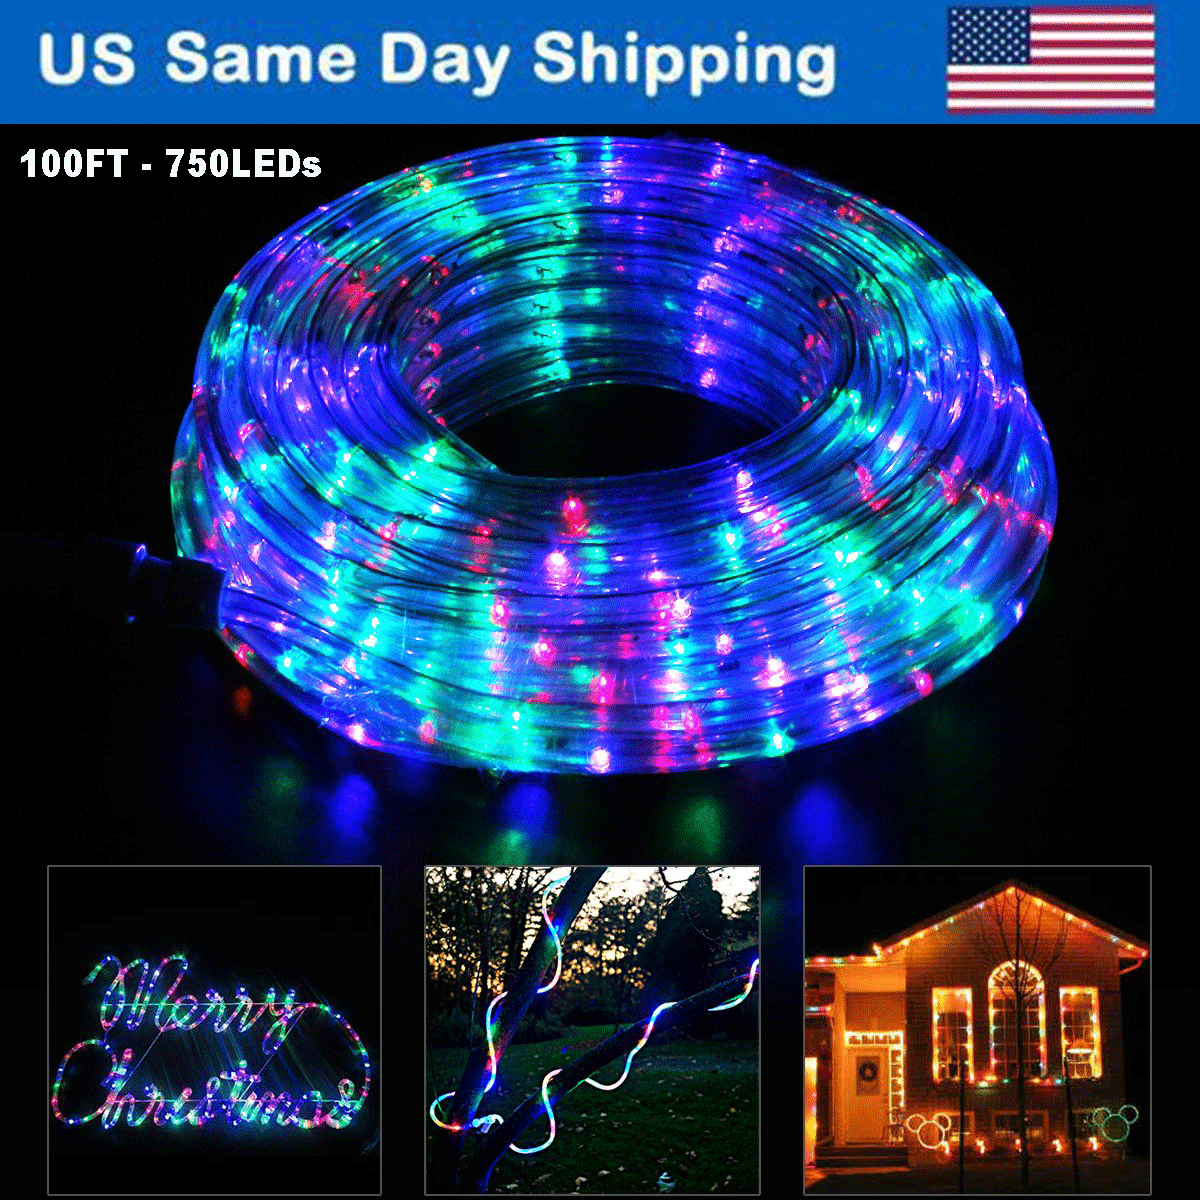 LED Flat Rope Light 110V Lighting In Outdoor Deck Xmas Christmas 9FT Blue Color 